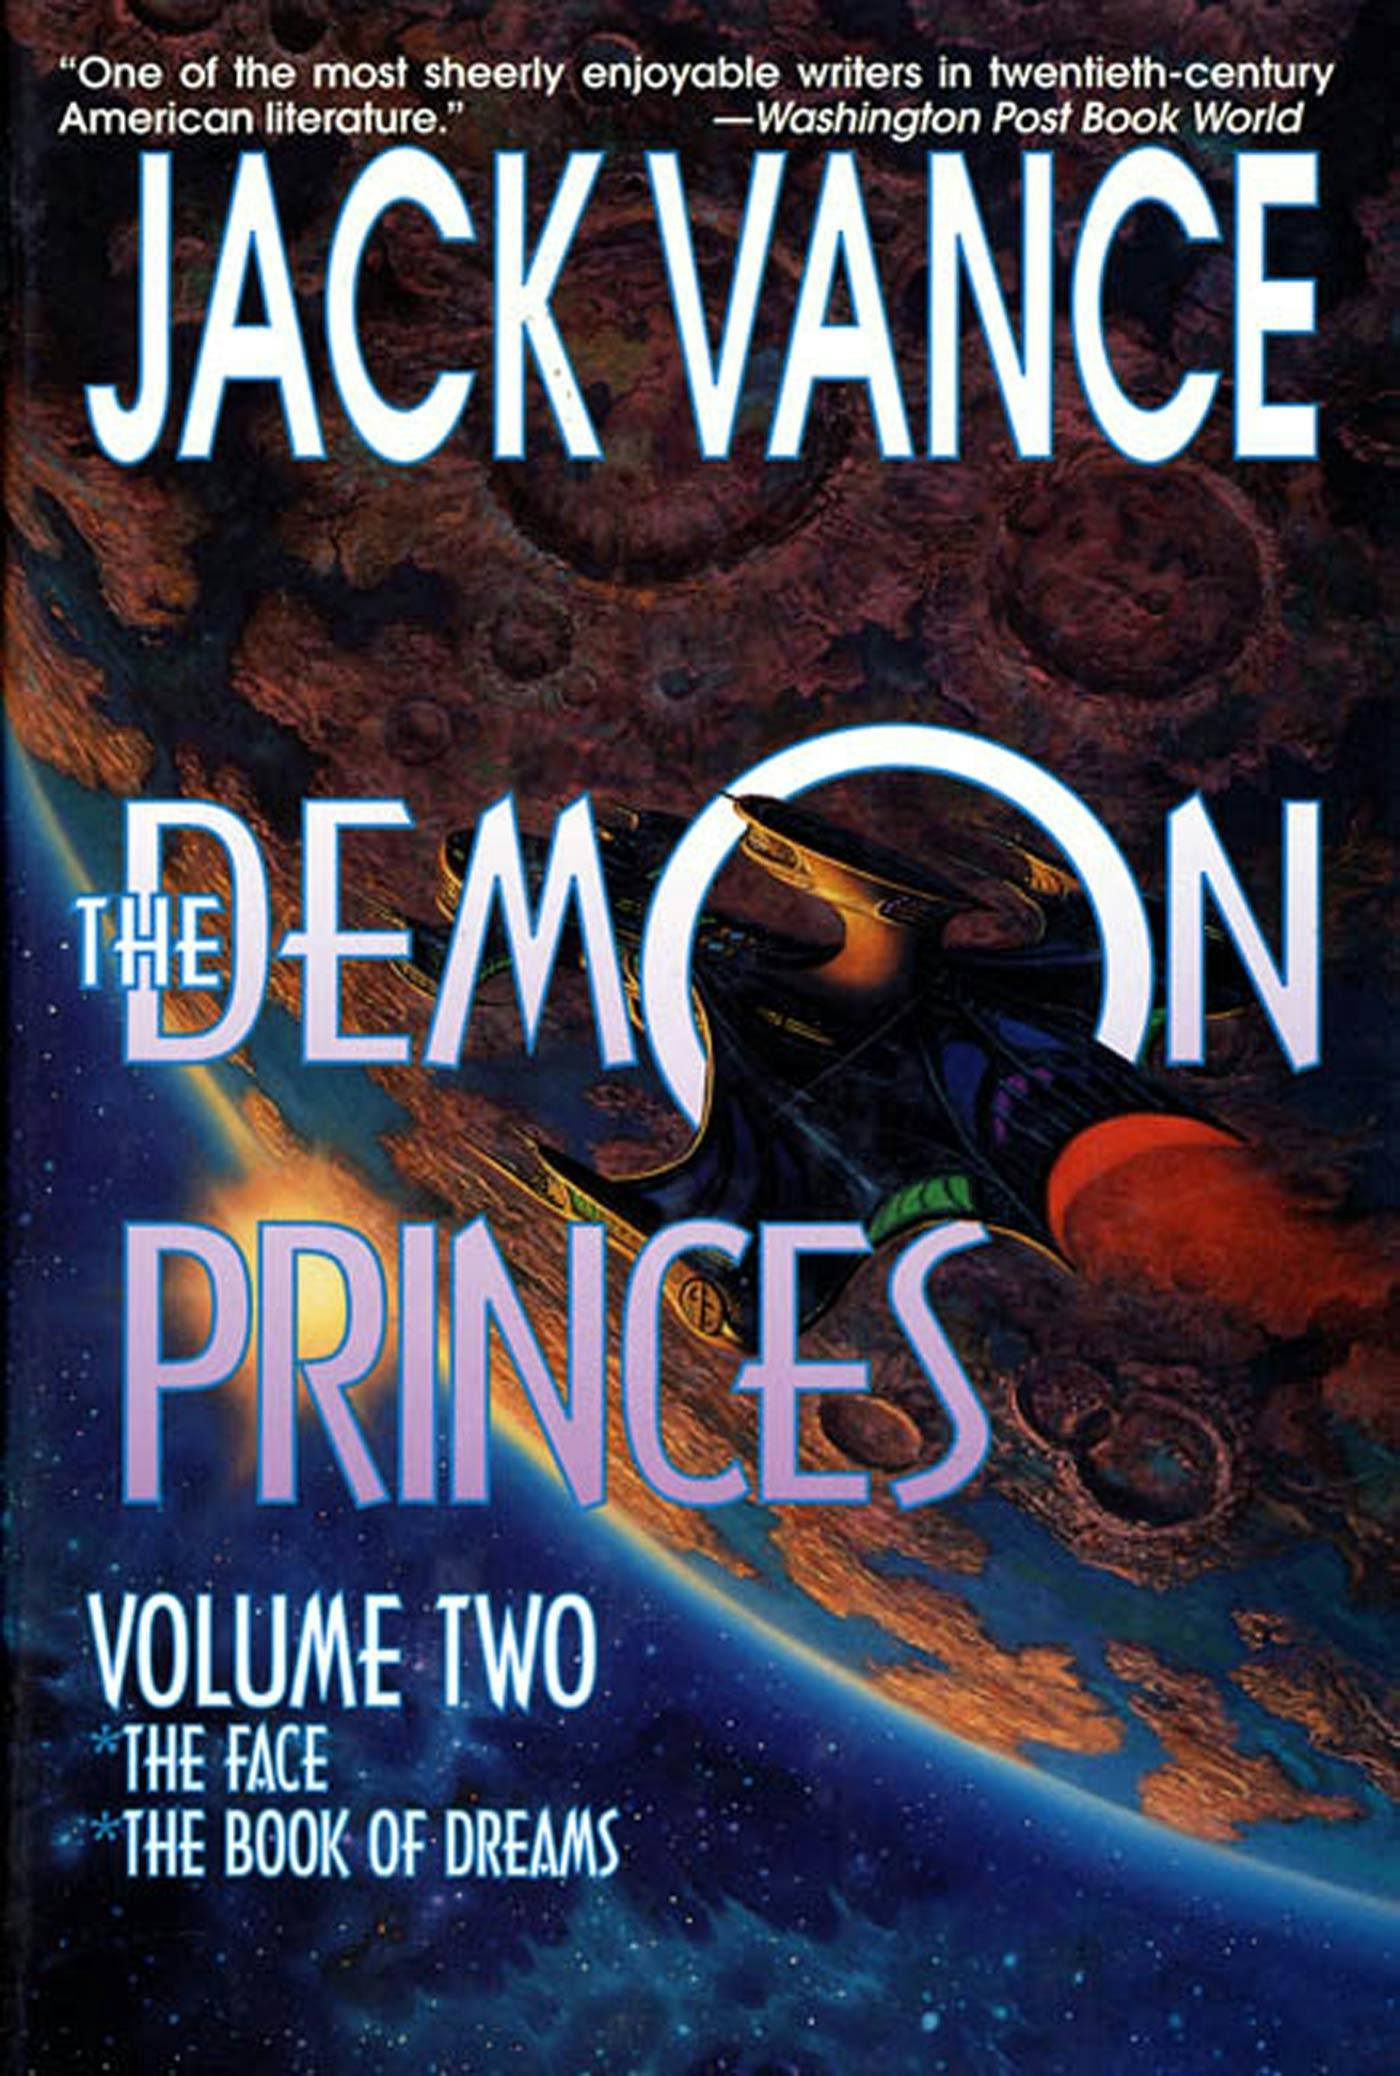 Cover for the book titled as: The Demon Princes, Vol. 2